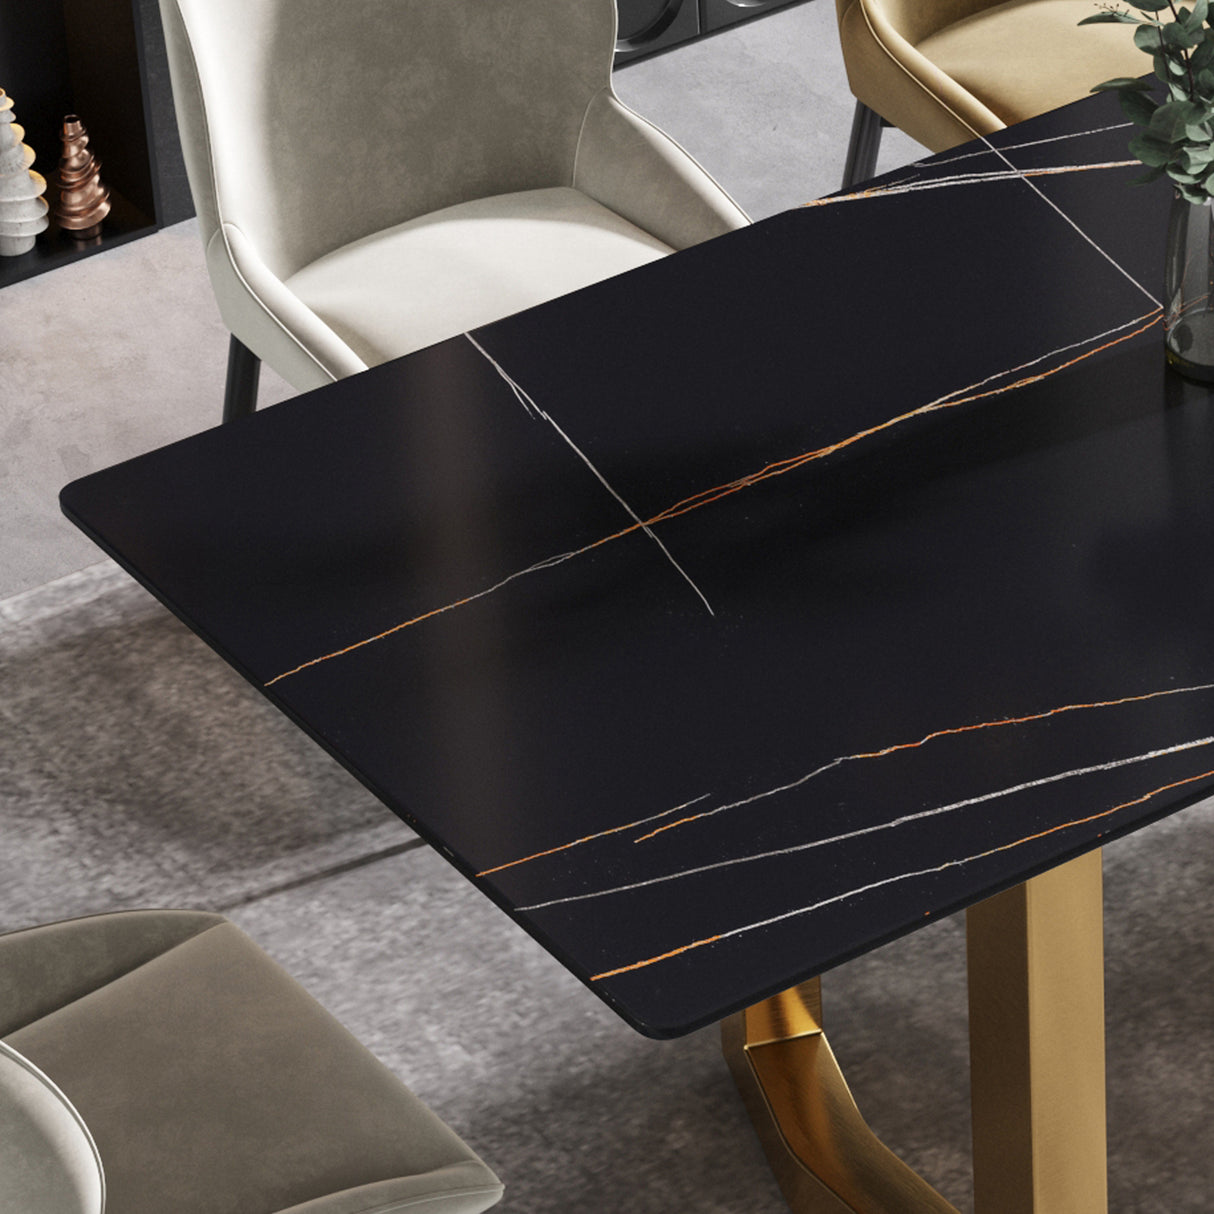 70.87" modern artificial stone black straight edge golden metal leg dining table-can accommodate 6-8 people - Home Elegance USA